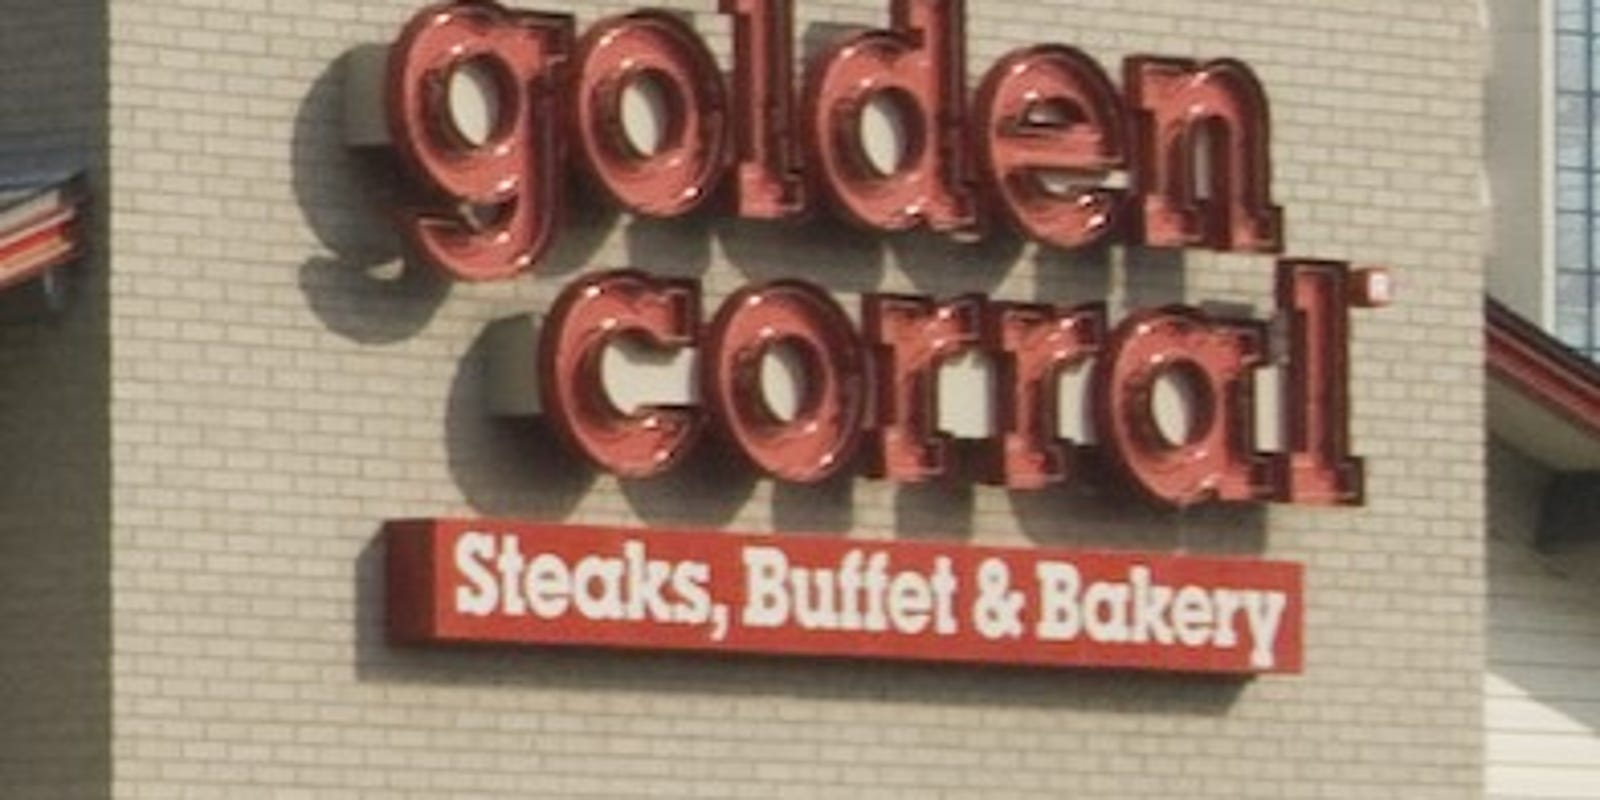 Food Critic Polly Campbell S Golden Corral Review From 1999